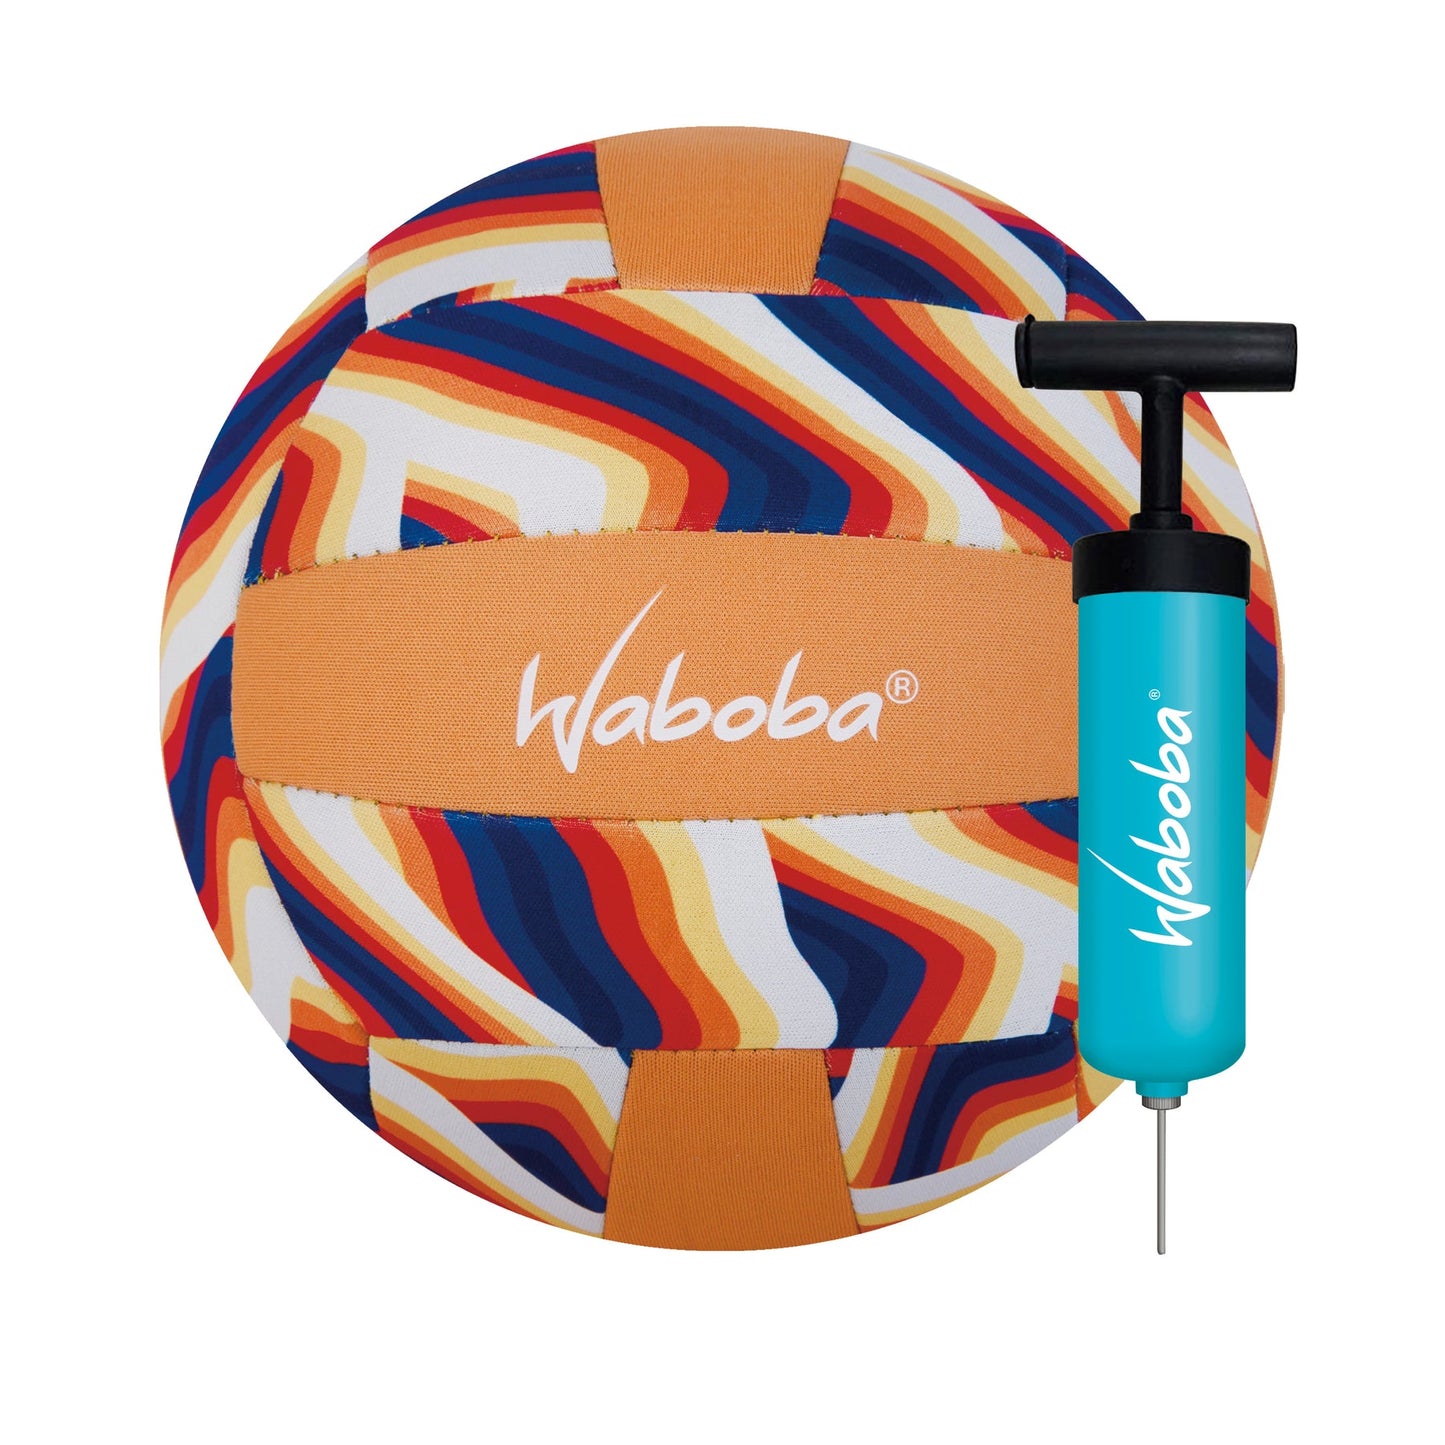 Waboba Beach Volleyball with Pump